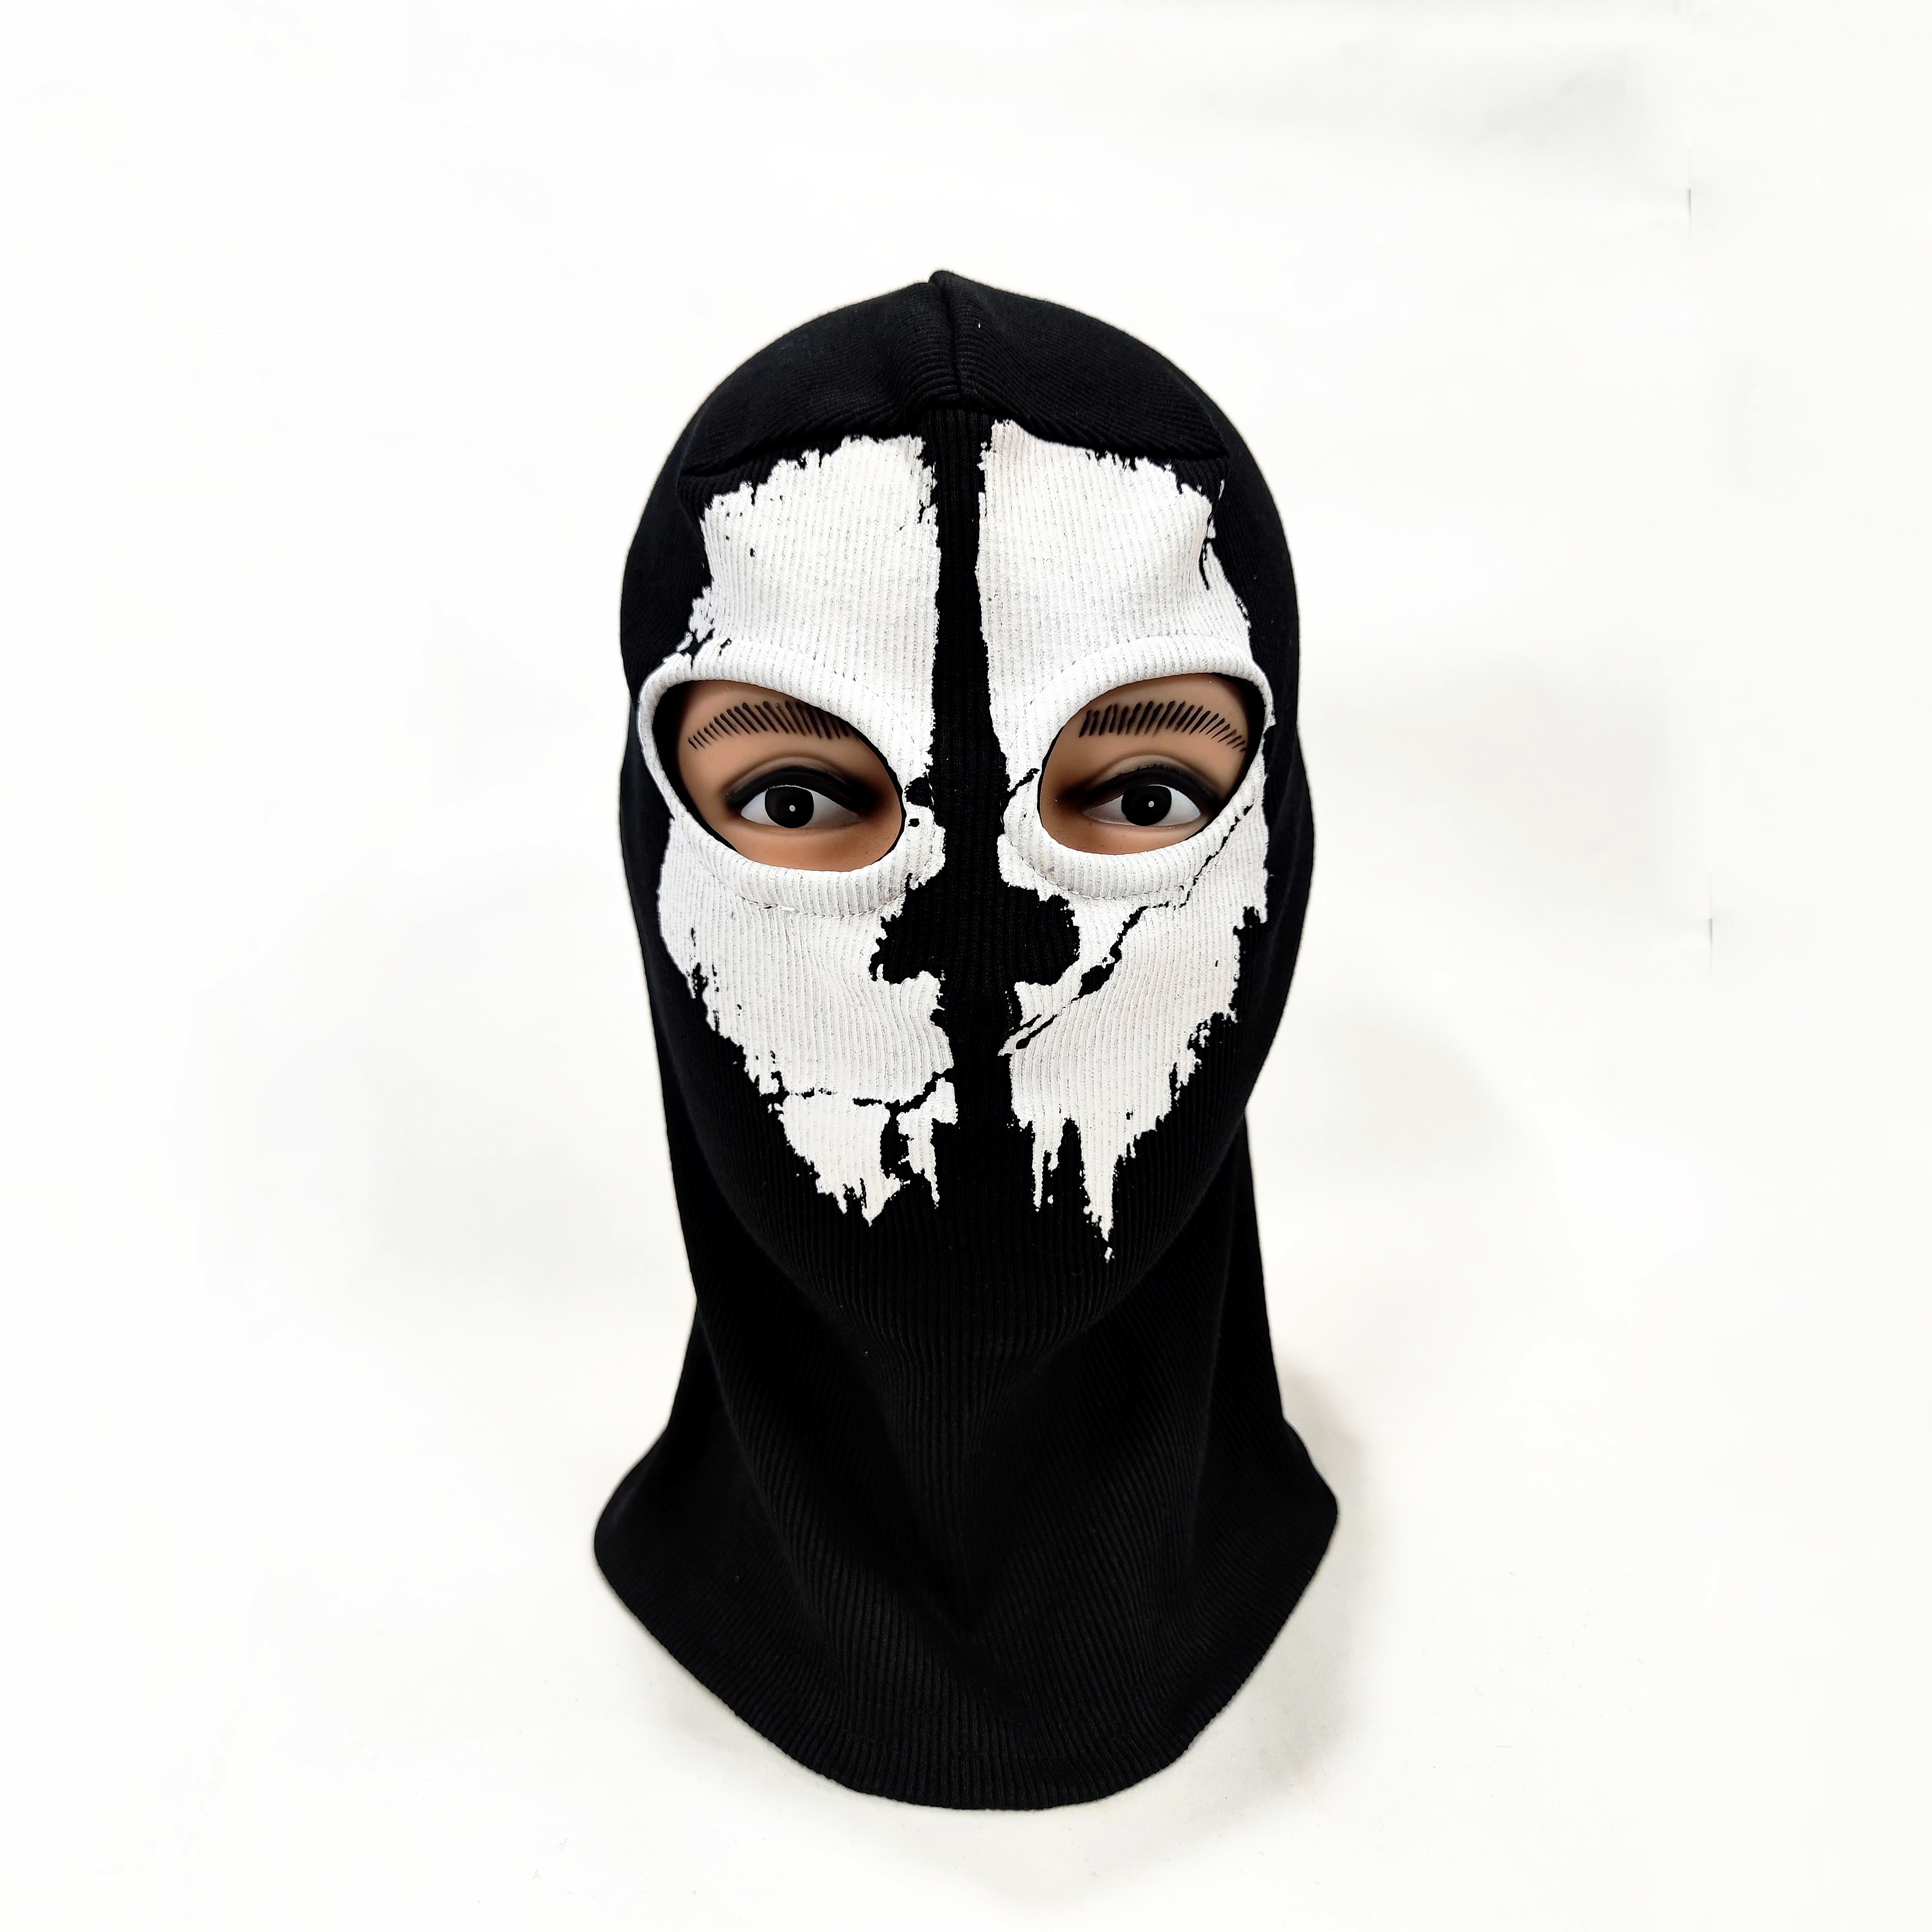 Call Of Duty Ghost Mask pour adulte Balaclava Hat Skull Face Mask Cosplay  Costume Masques